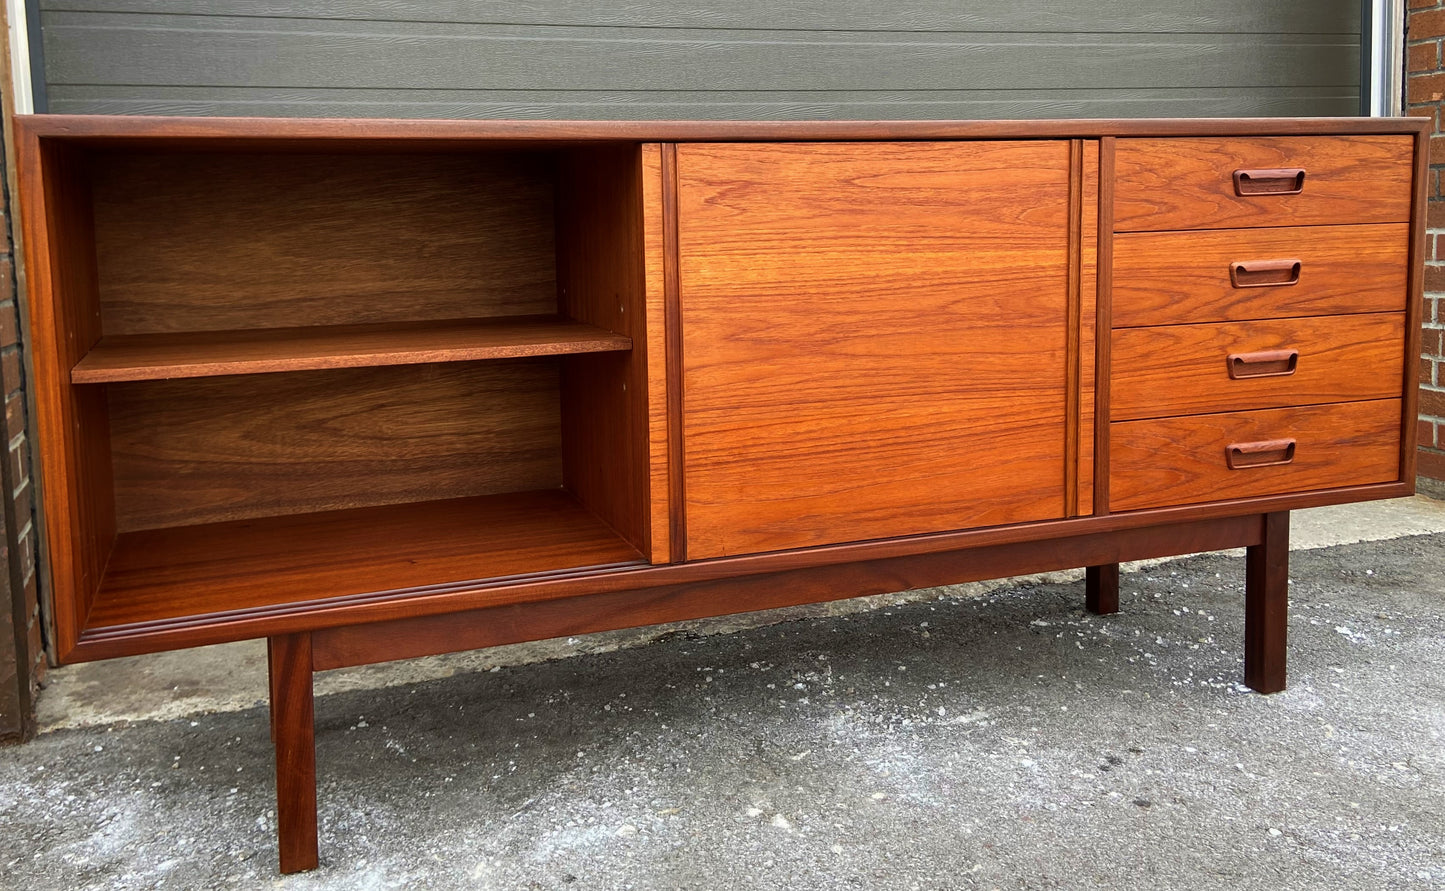 REFINISHED Mid Century Modern Teak Sideboard by RS Associates, 72" perfect